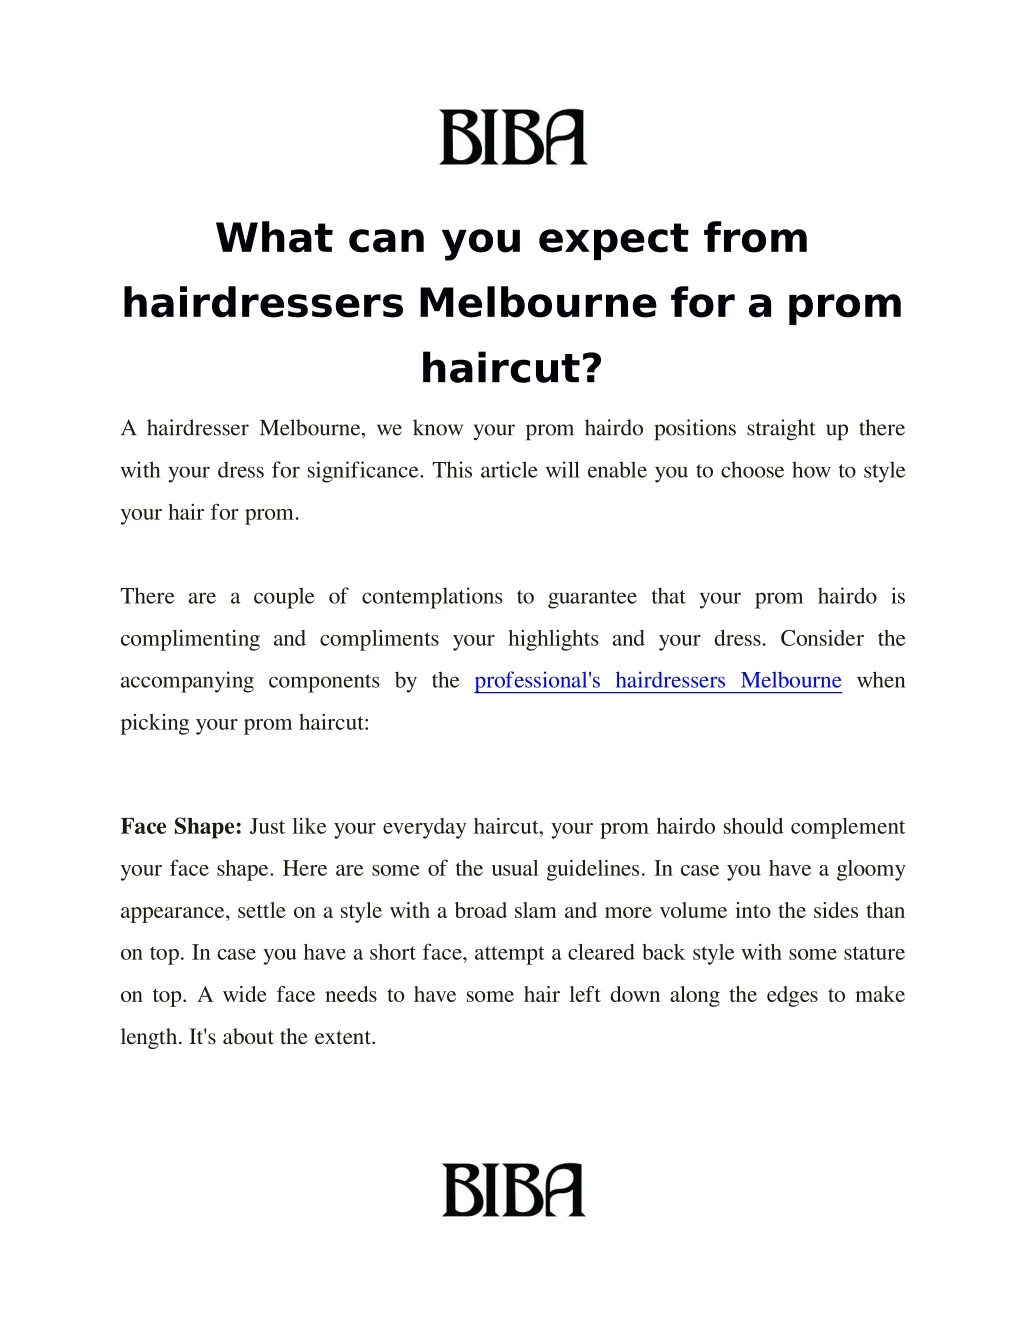 what can you expect from hairdressers melbourne